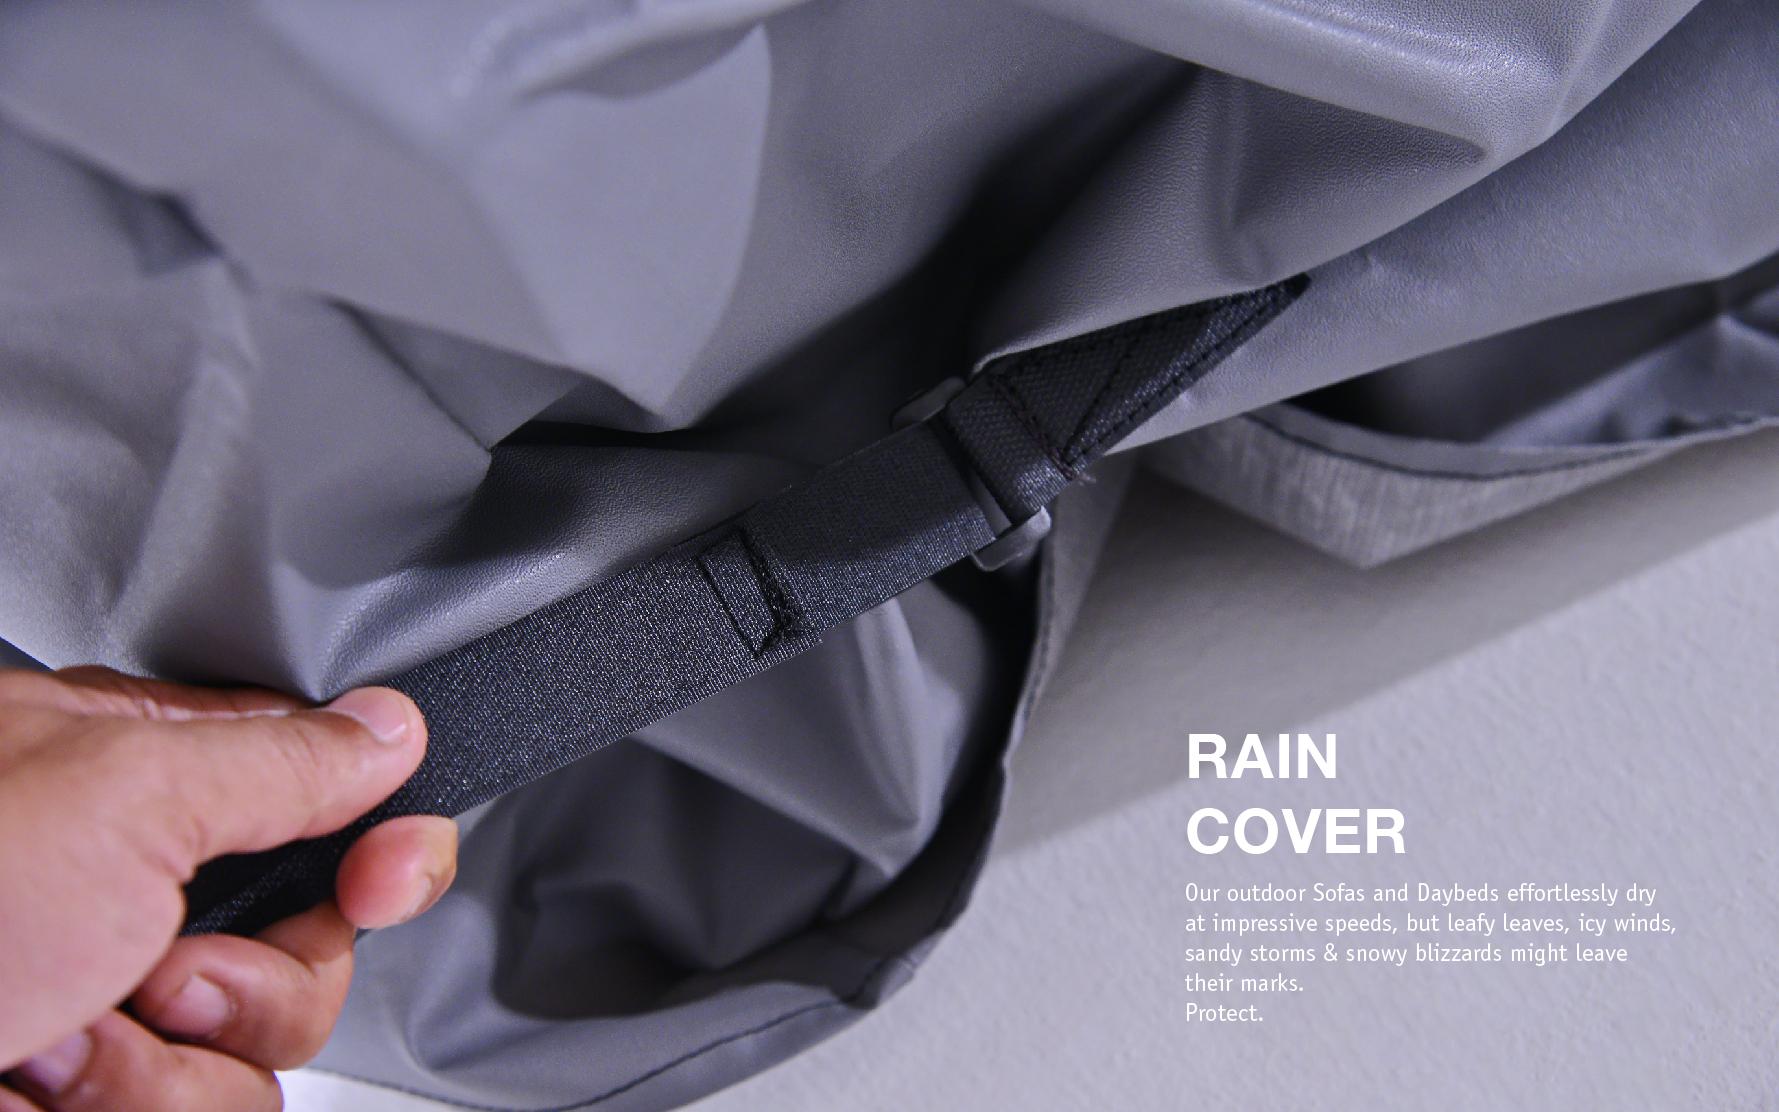 Rain cover for two-seater sofa

Cut to size: D 35